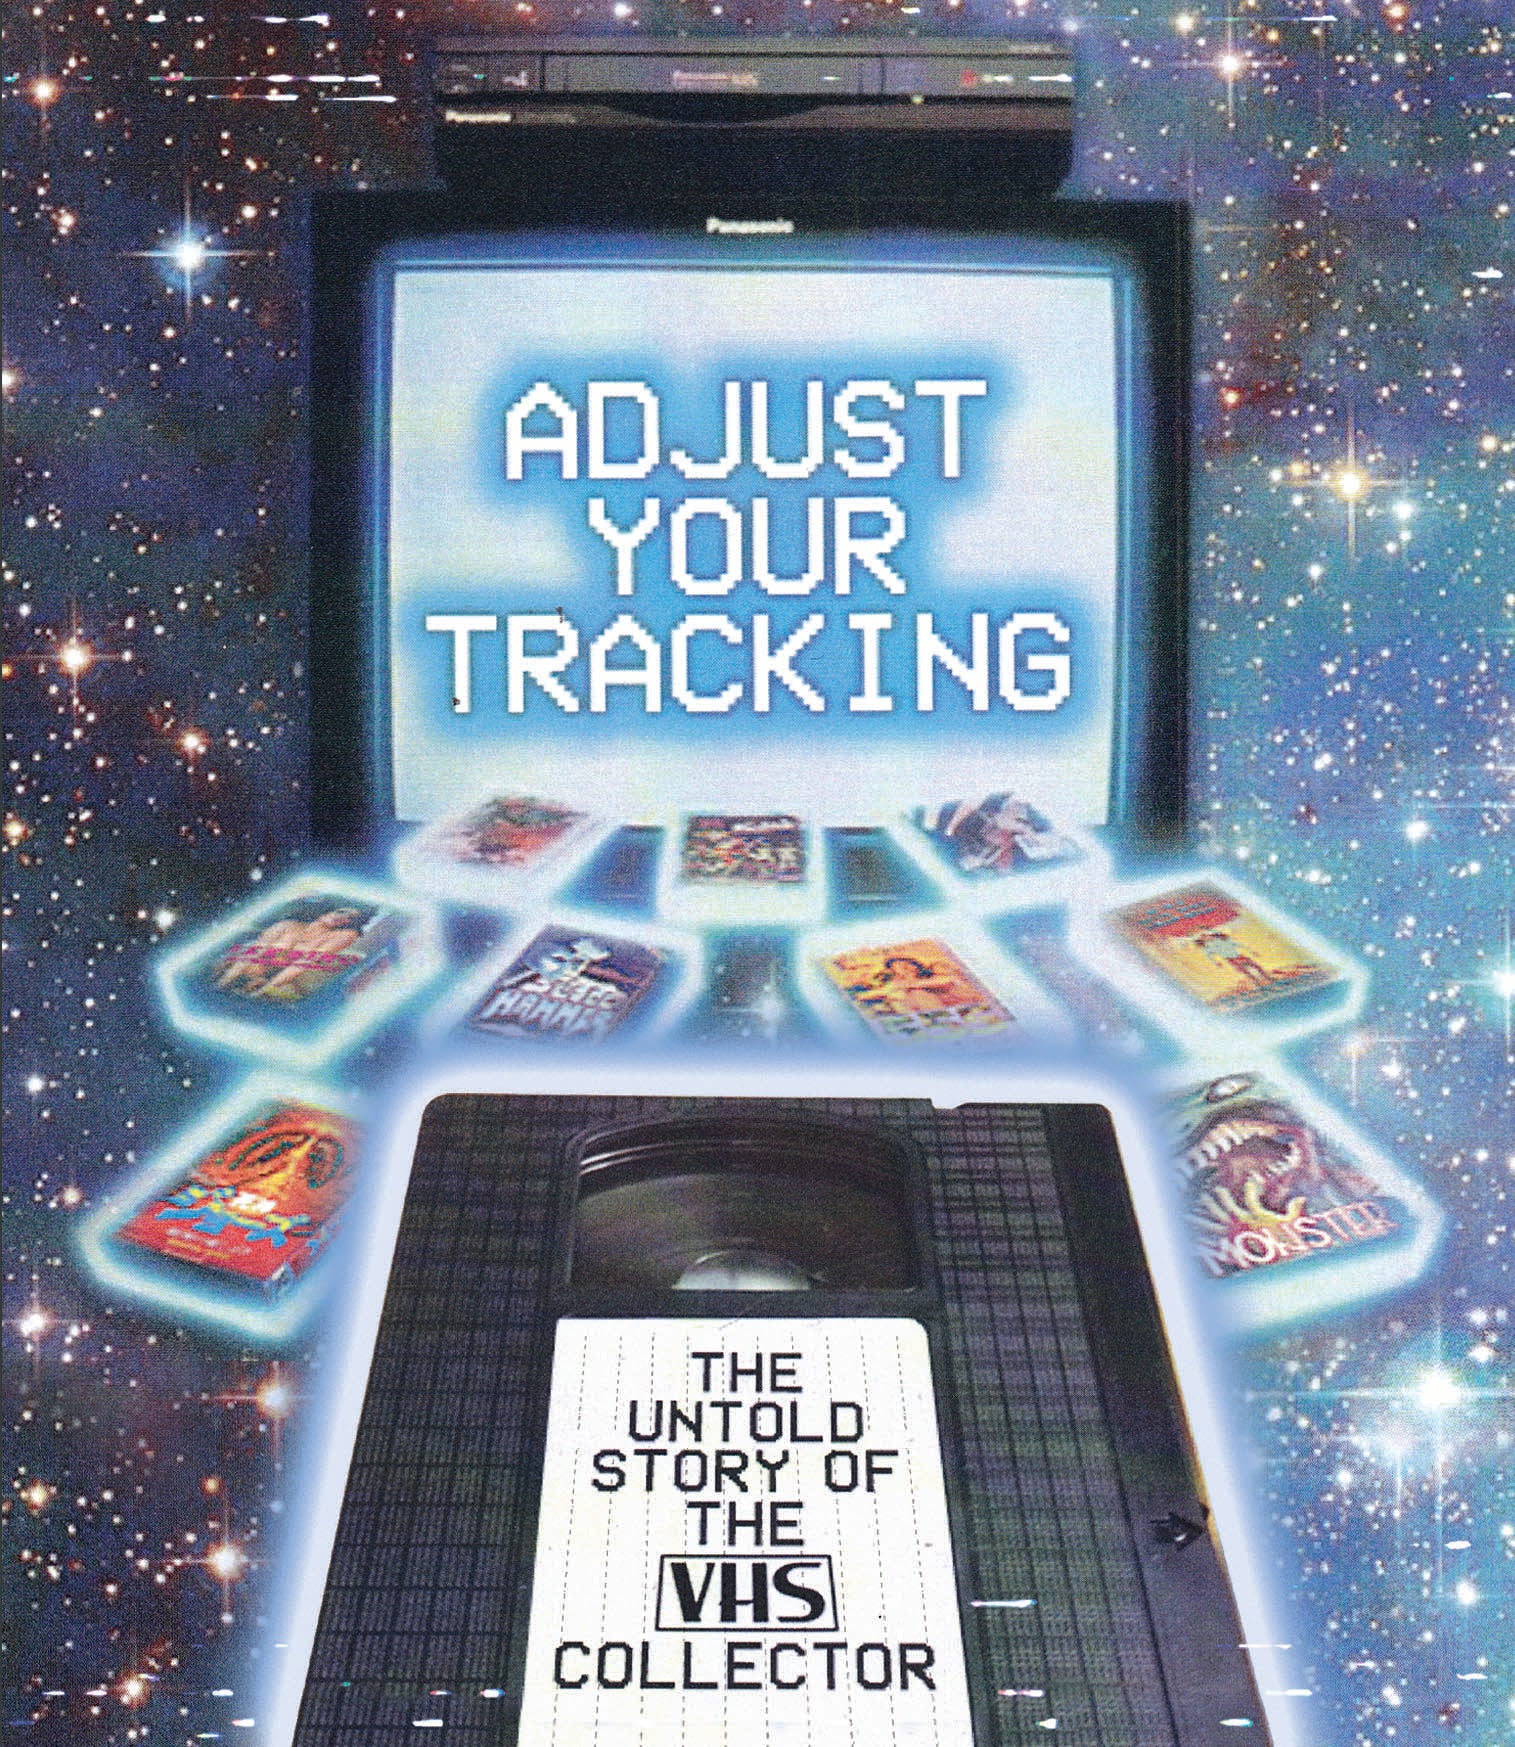 ADJUST YOUR TRACKING (LIMITED EDITION) BLU-RAY